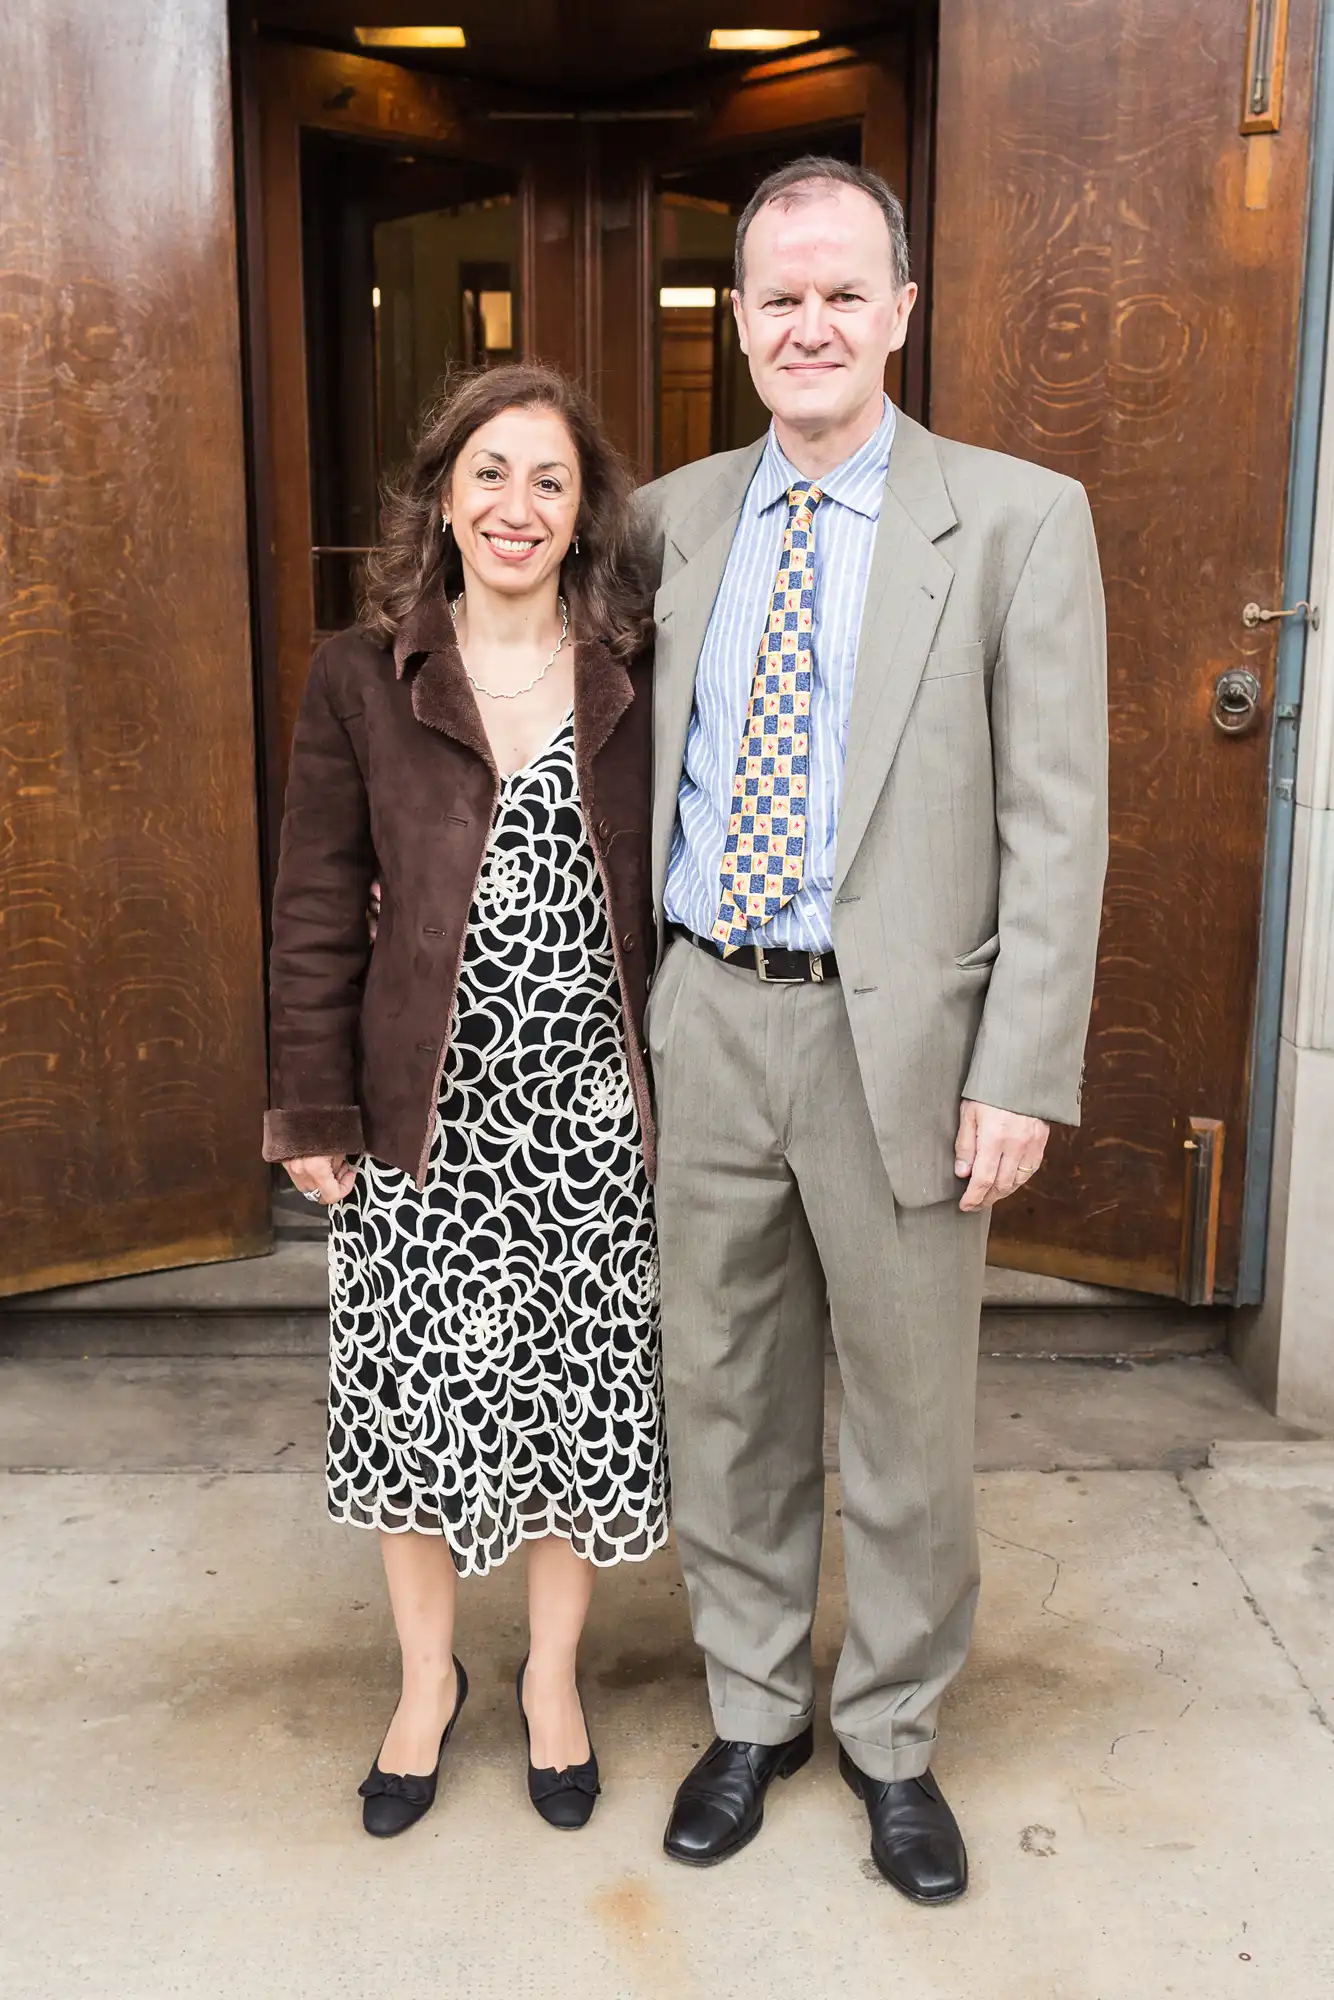 A man and a woman standing and smiling in front of wooden doors, dressed in formal attire, the man in a suit and the woman in a dress and jacket.